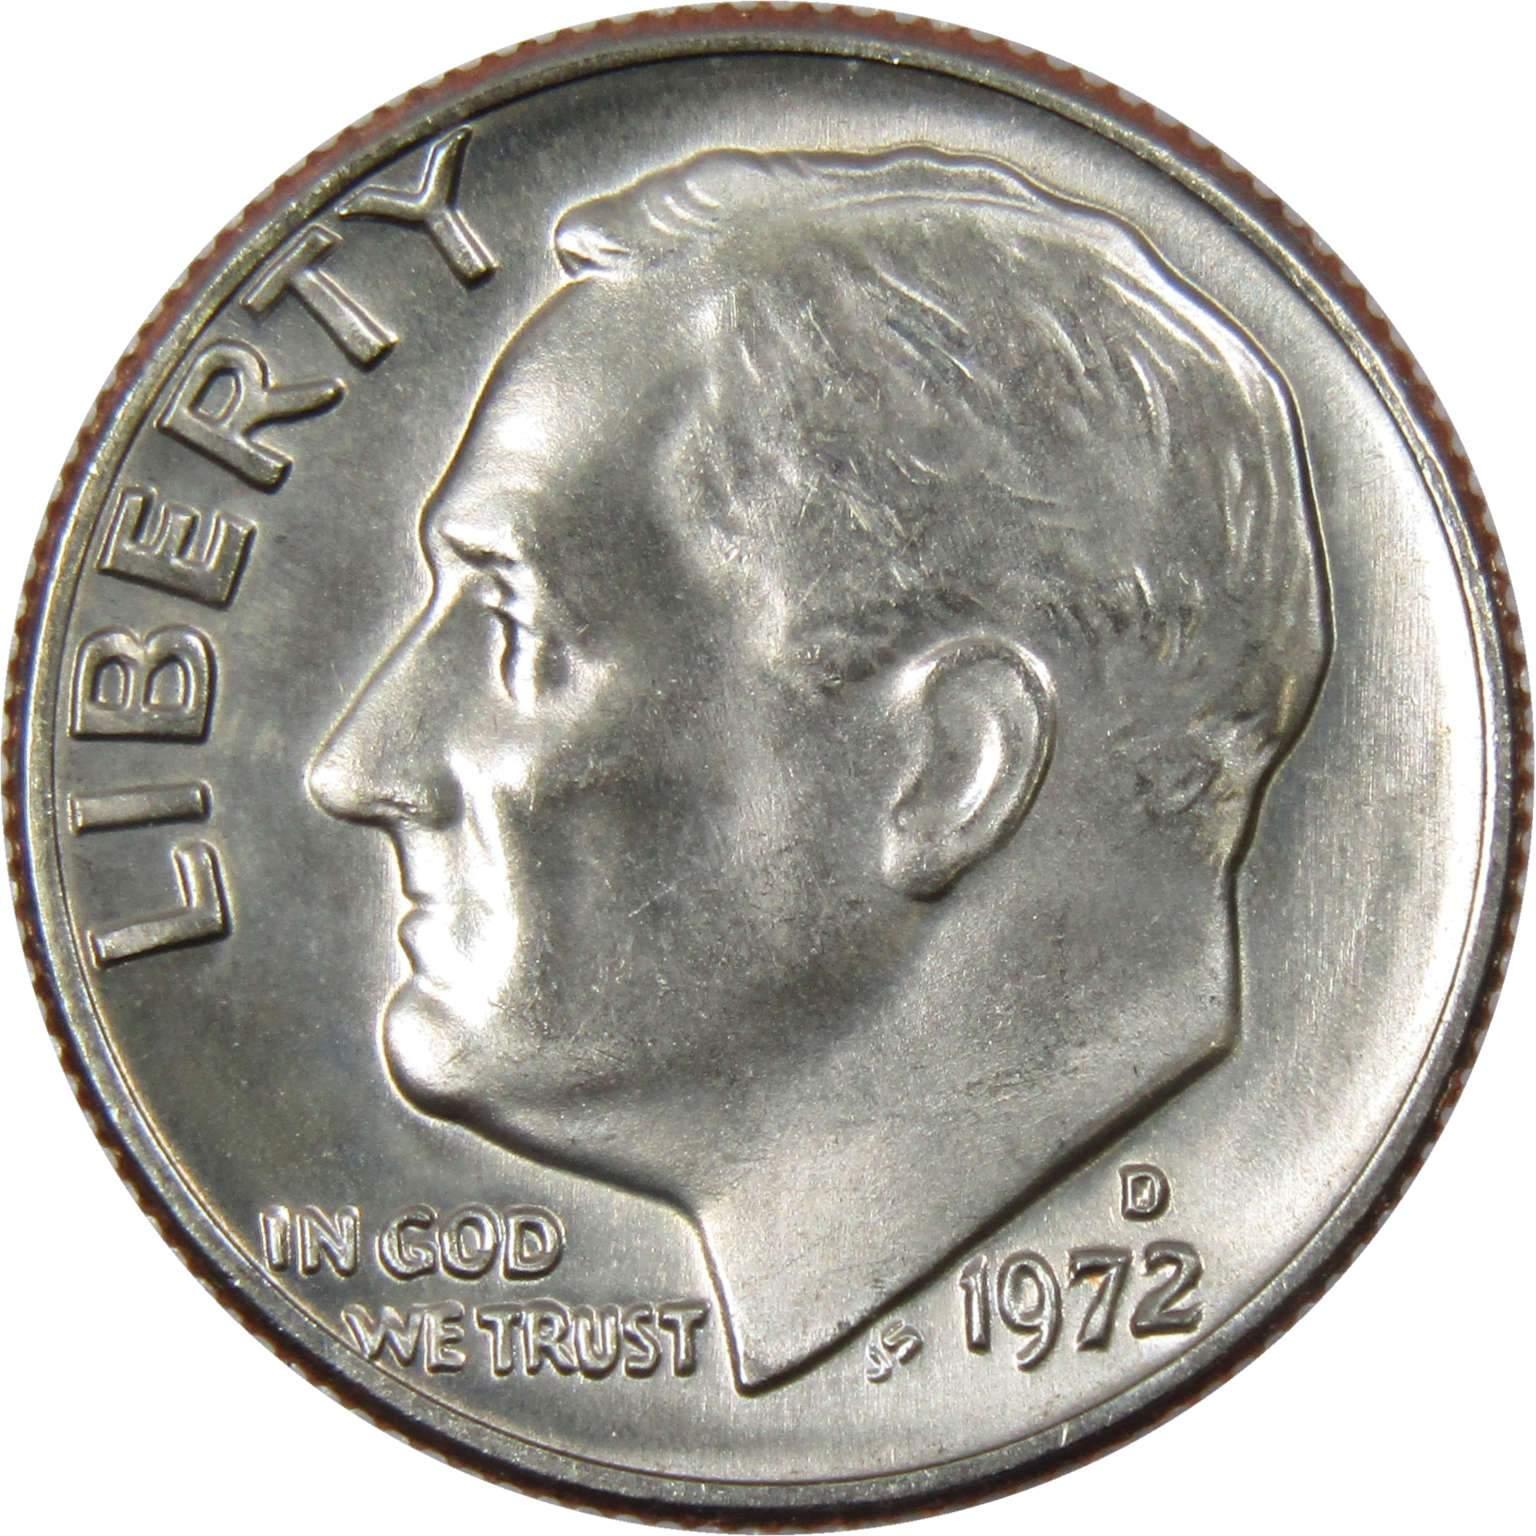 1972 D Roosevelt Dime BU Uncirculated Mint State 10c US Coin Collectible